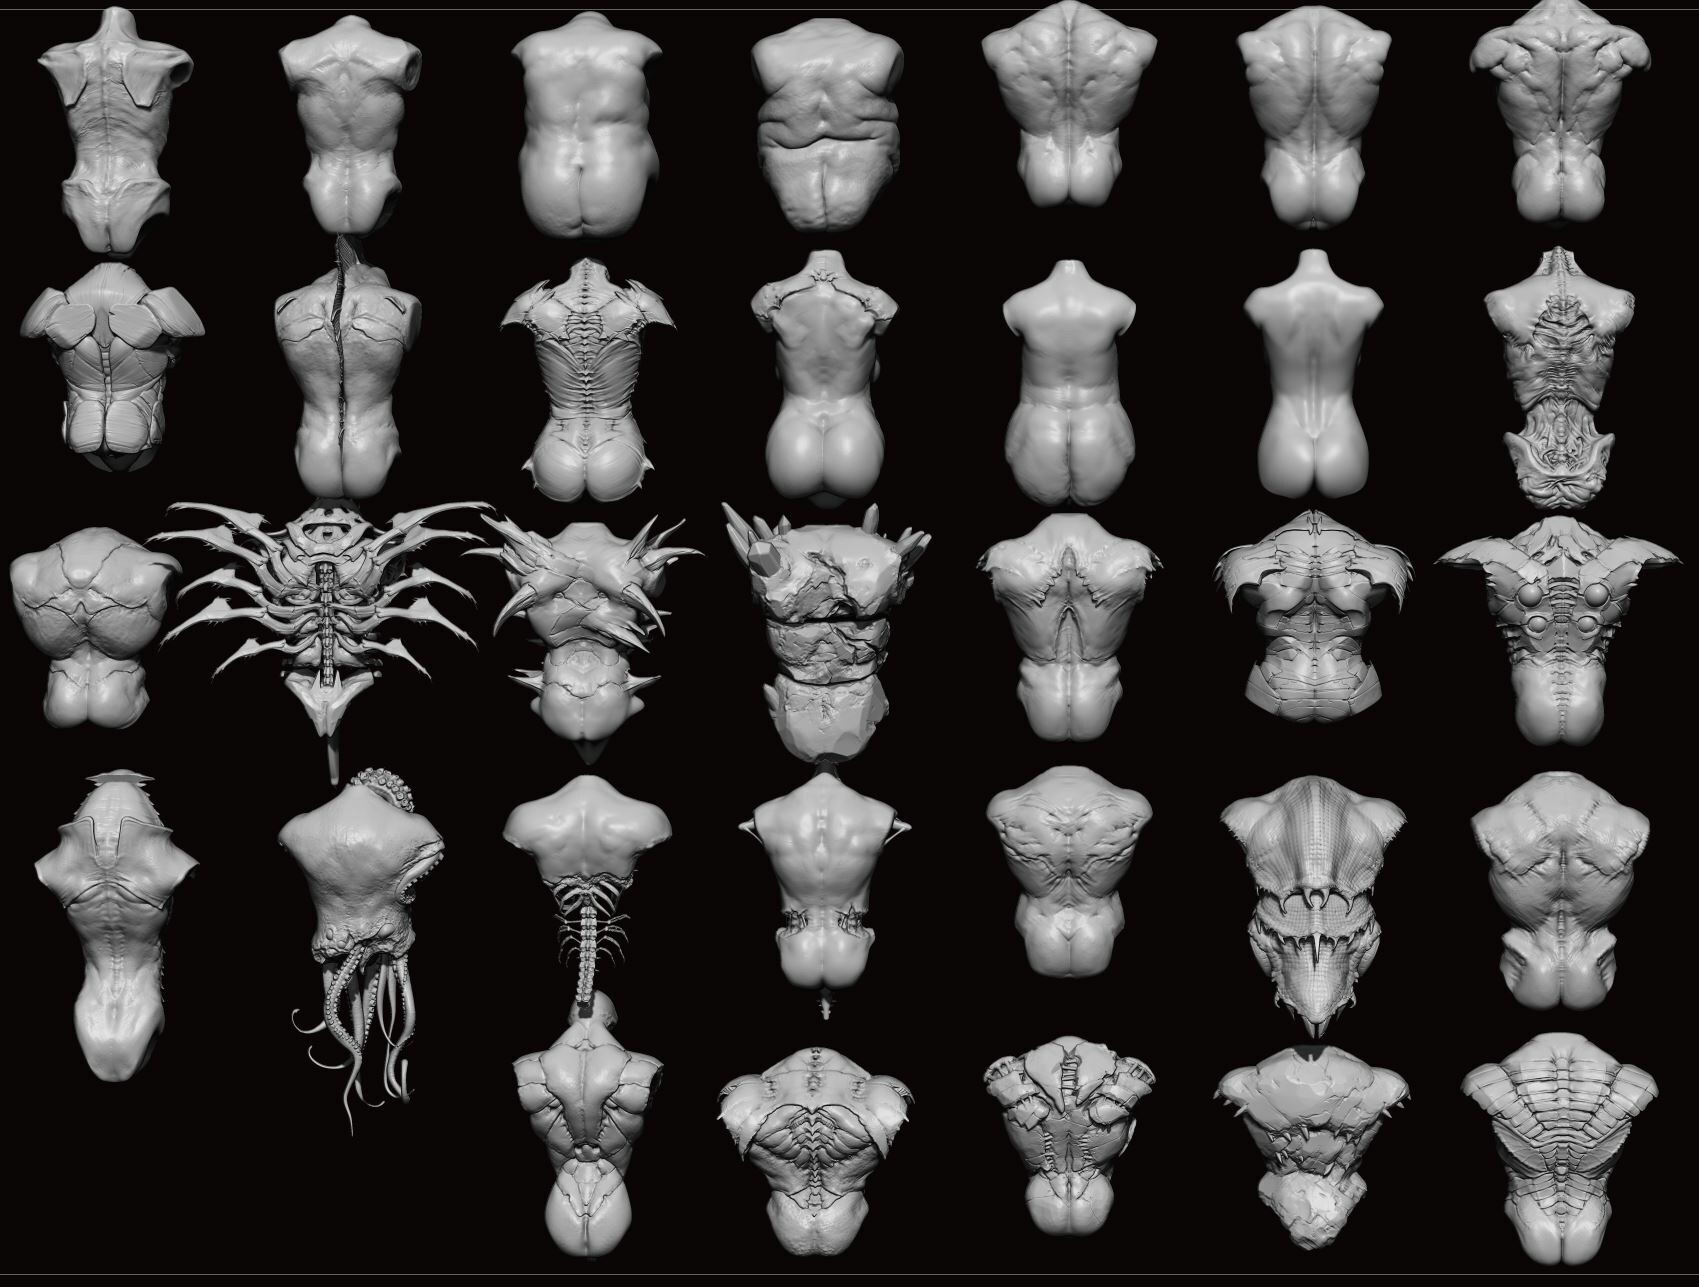 zbrush characters and creatures pdf